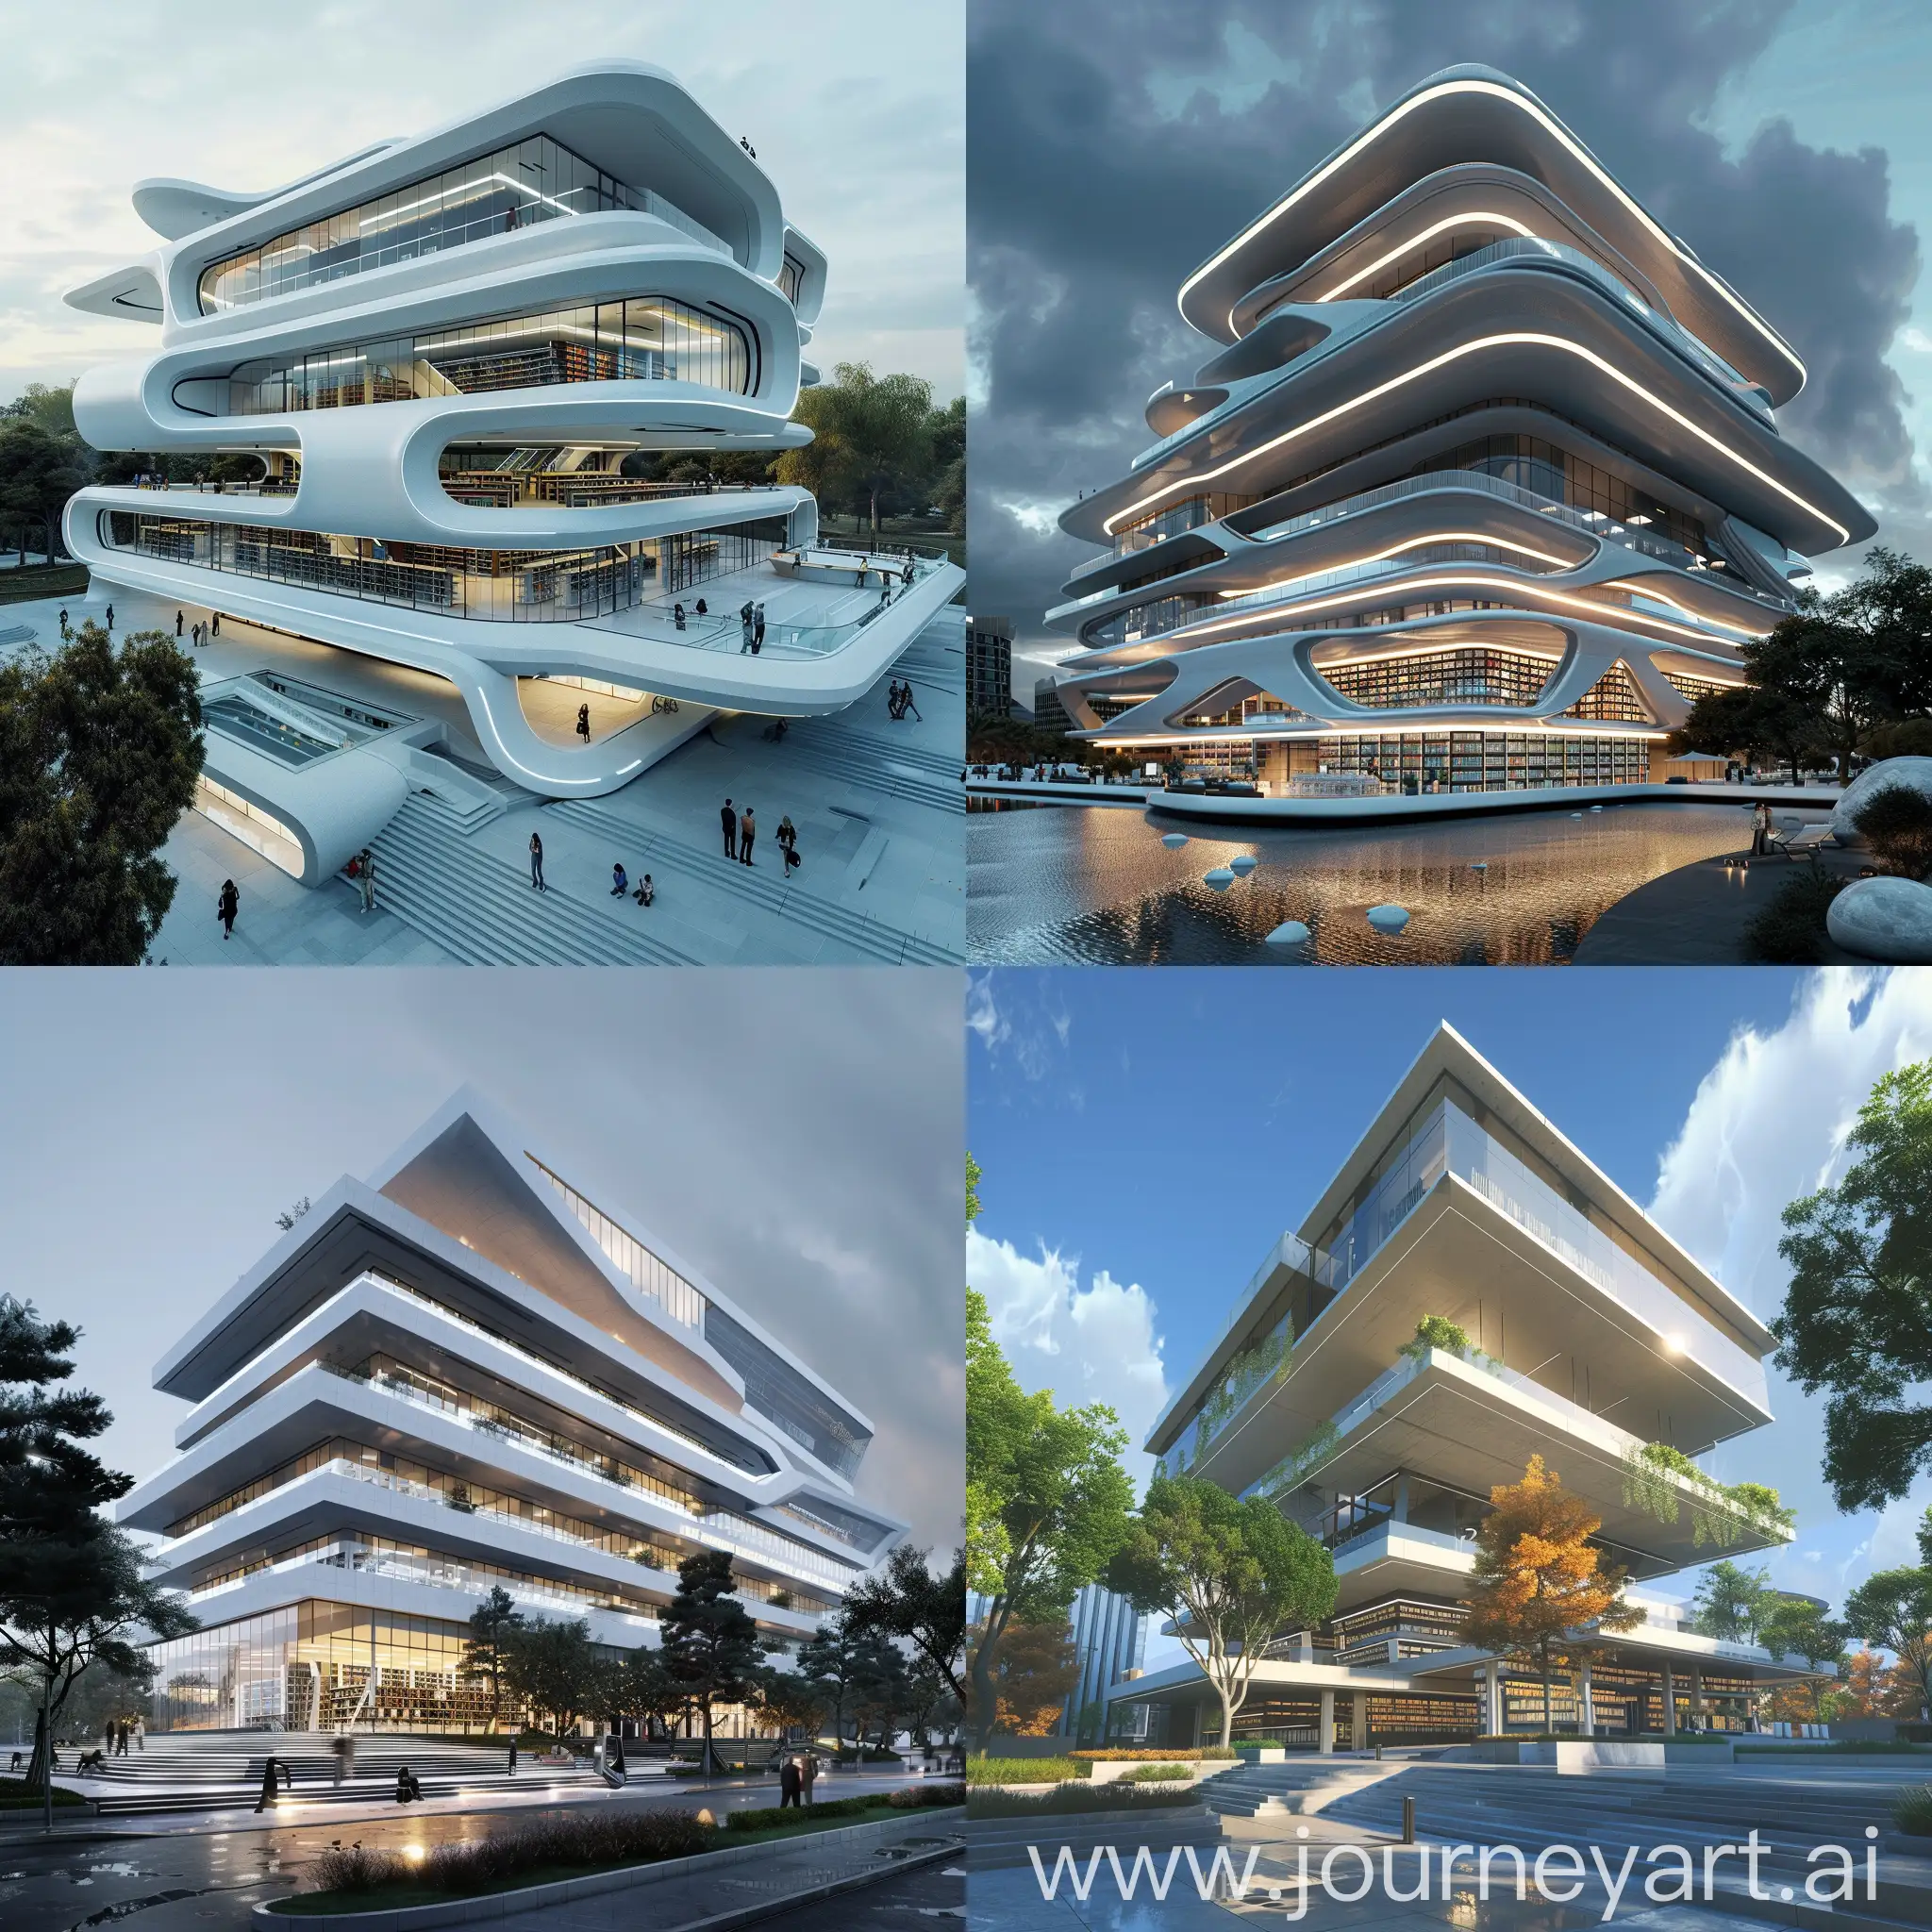 HyperRealistic-HighTech-Library-Building-with-Five-Floors-in-White-and-Gray